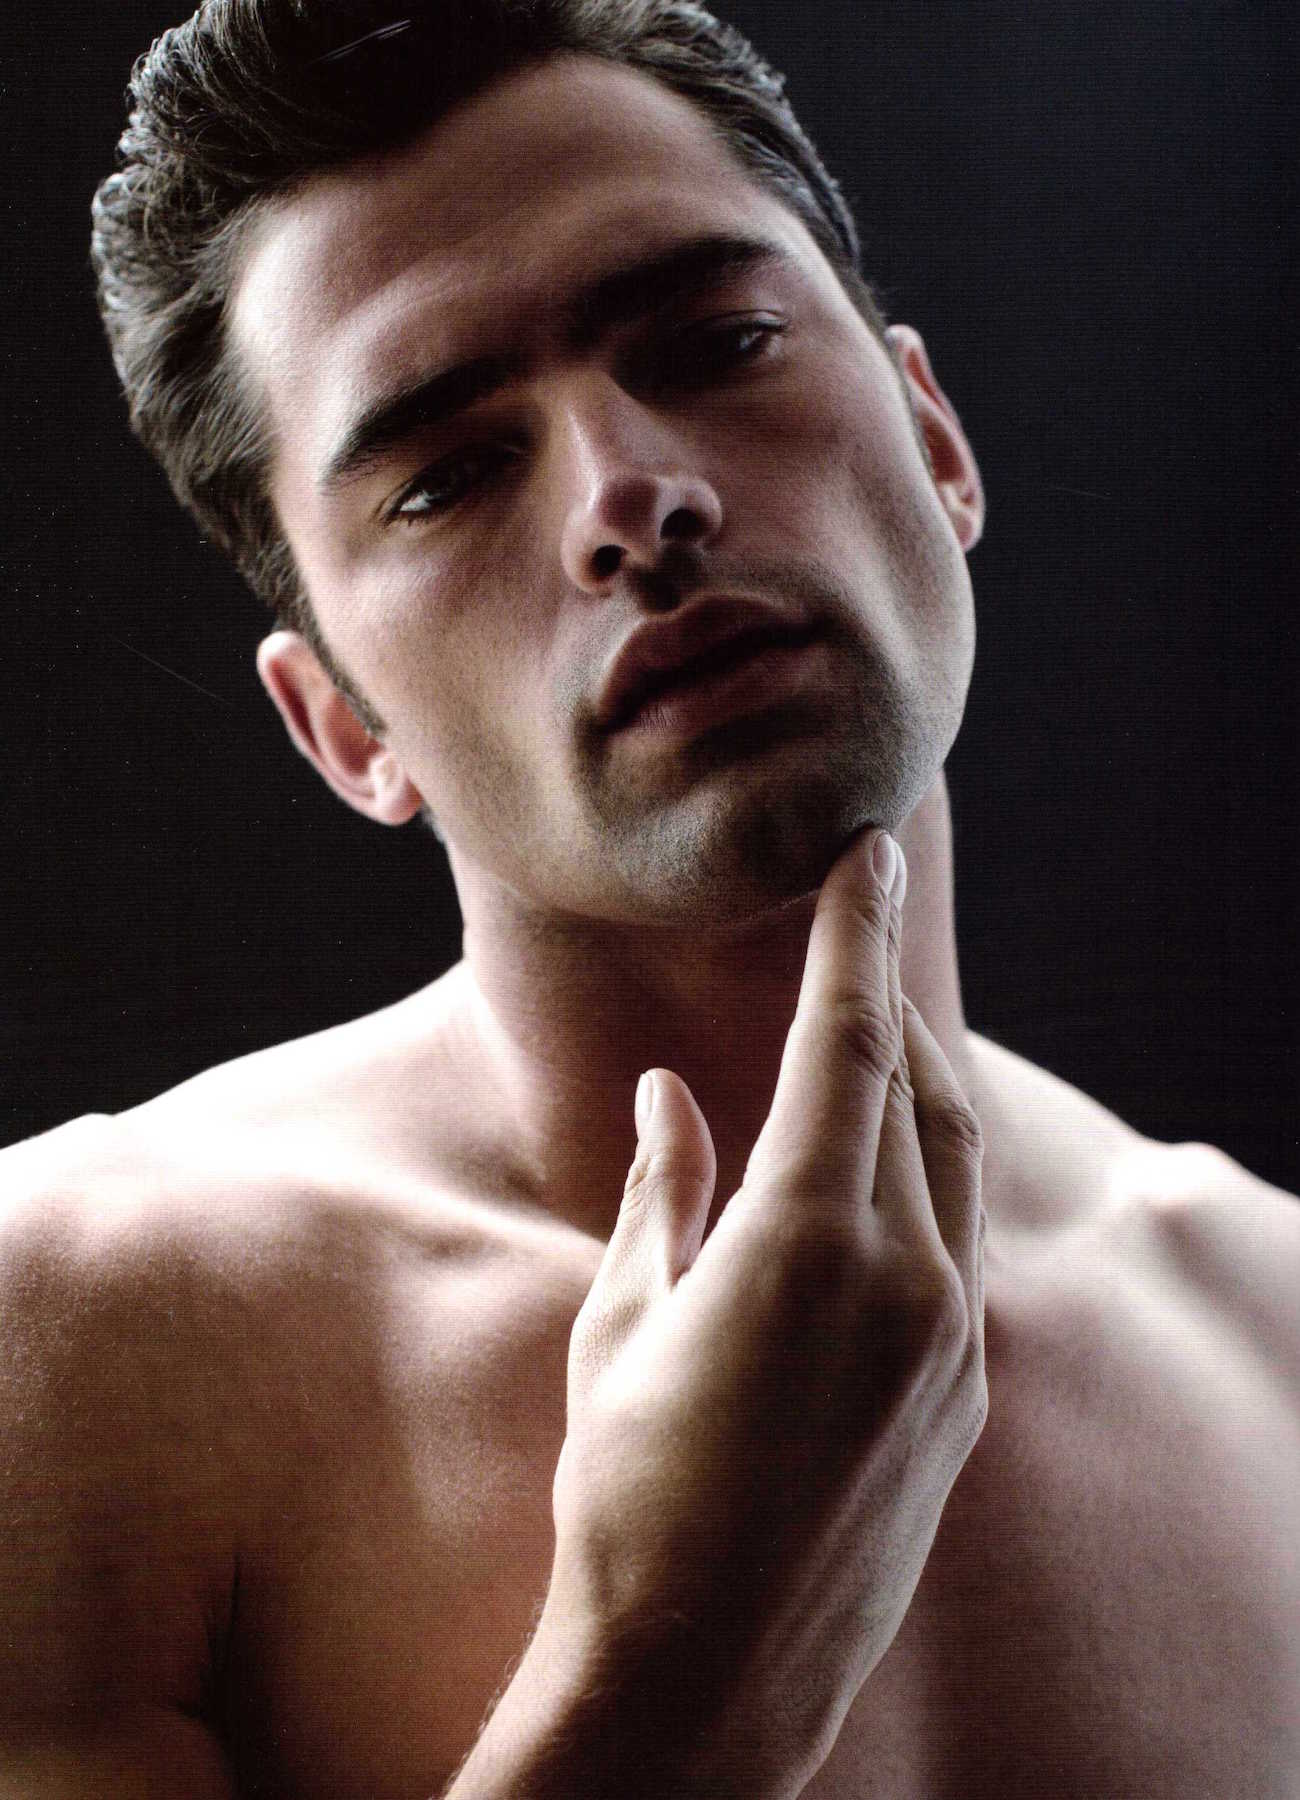 sean-opry-dsection-ss15-cover-story-025.jpg